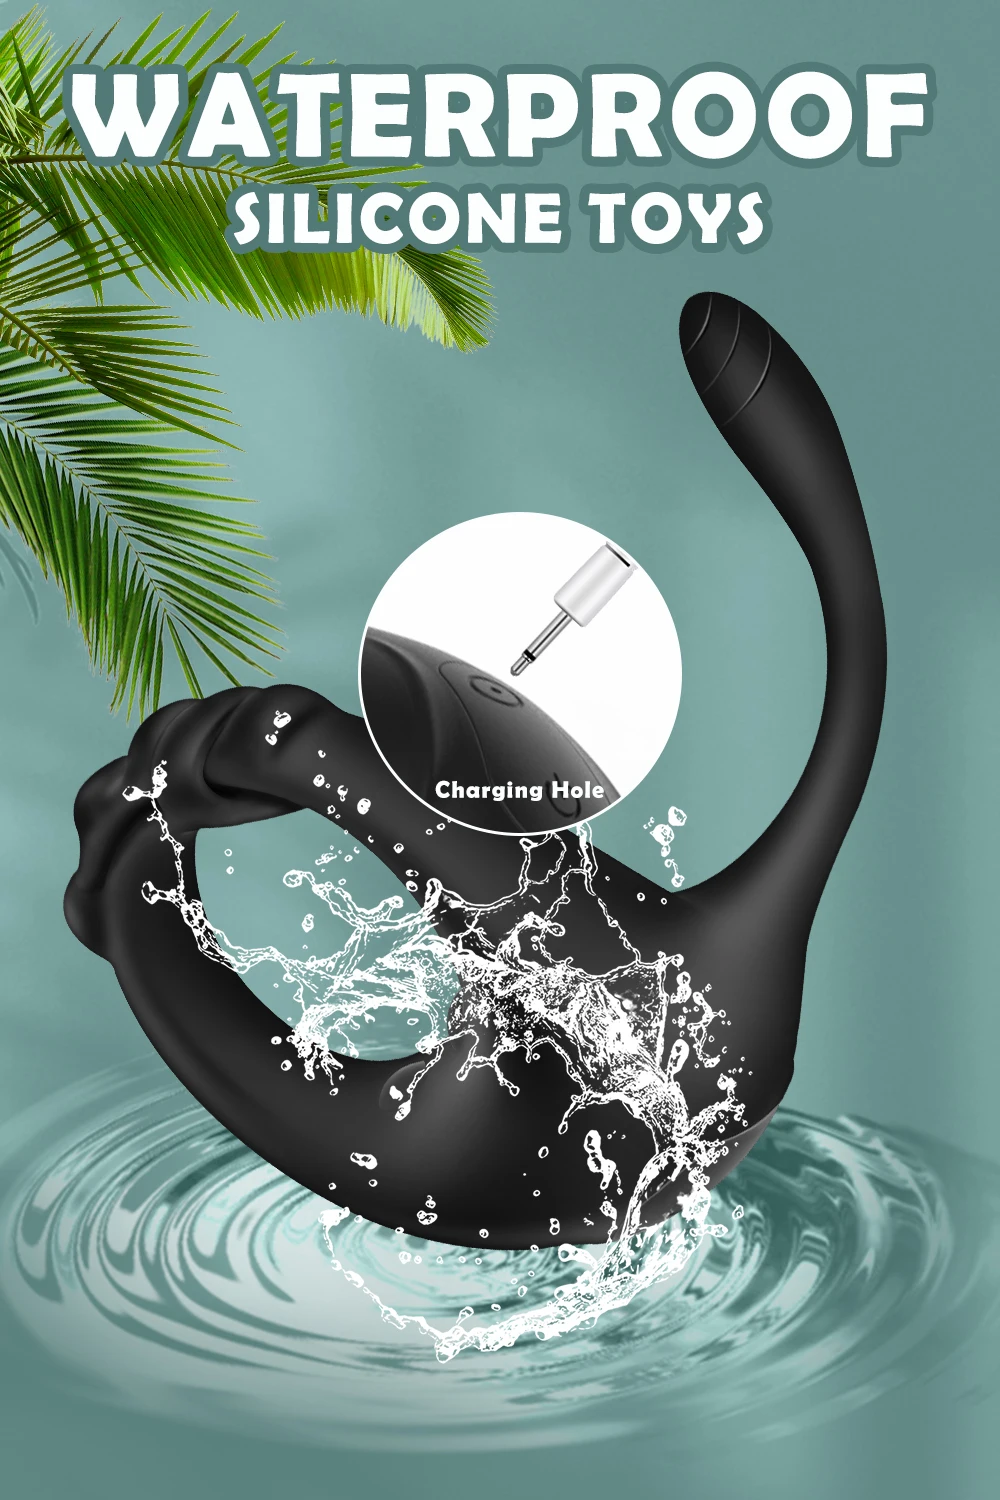 Sexy Toys Cockring for Men Bluetooth Penis Ring Vibrator Adult Goods for Men Wireless APP Remote Cock Ring Sex Toys for Adults Ua508341fb47d4a1cb3e240fa58b1d80b6